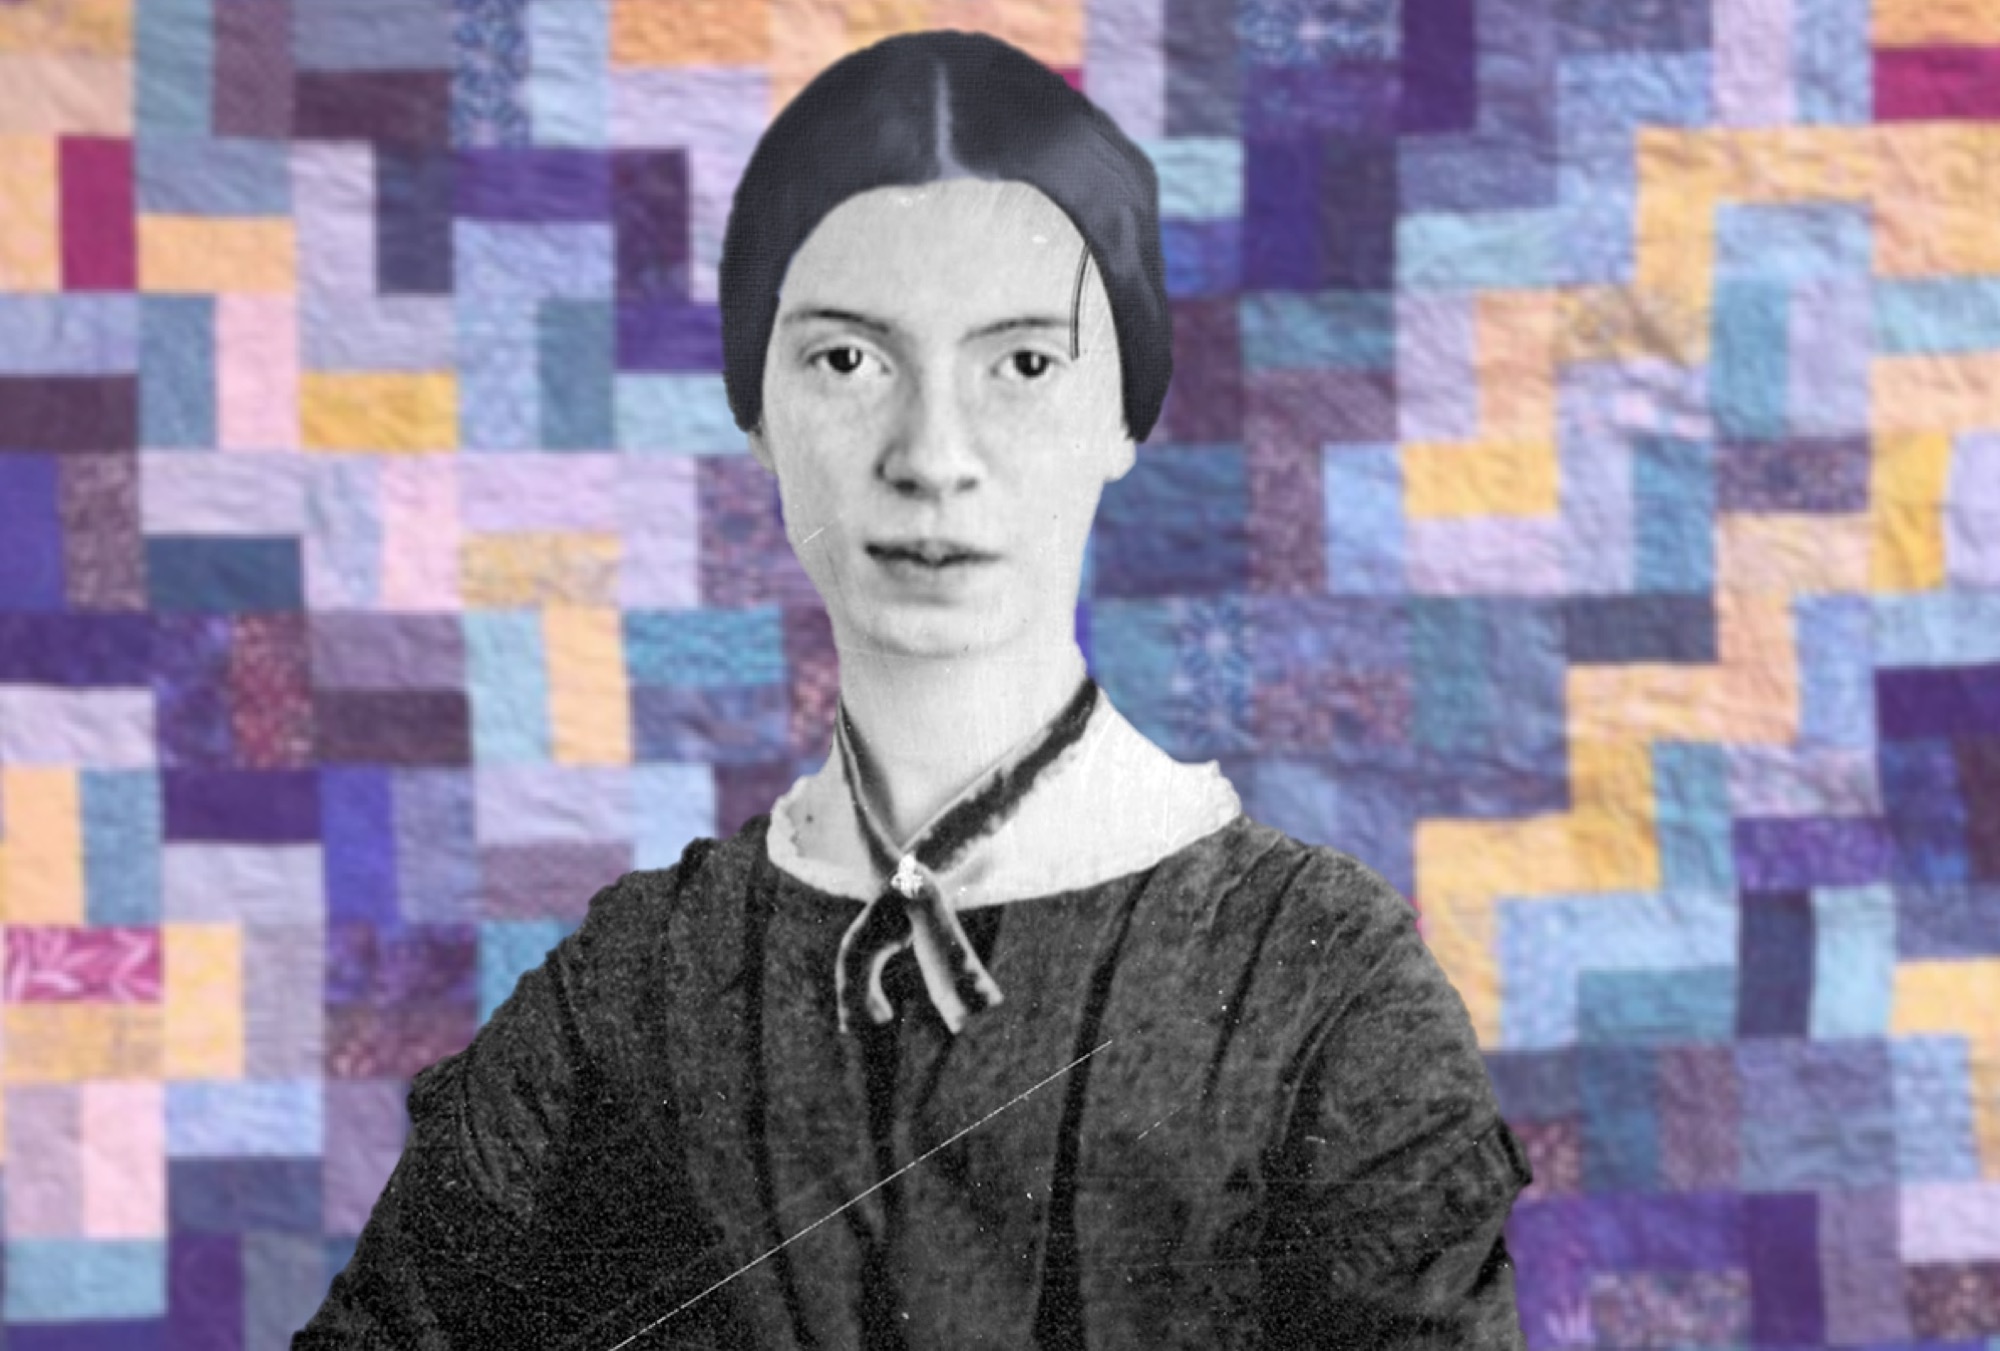 Photo of Emily Dickinson with colorful background